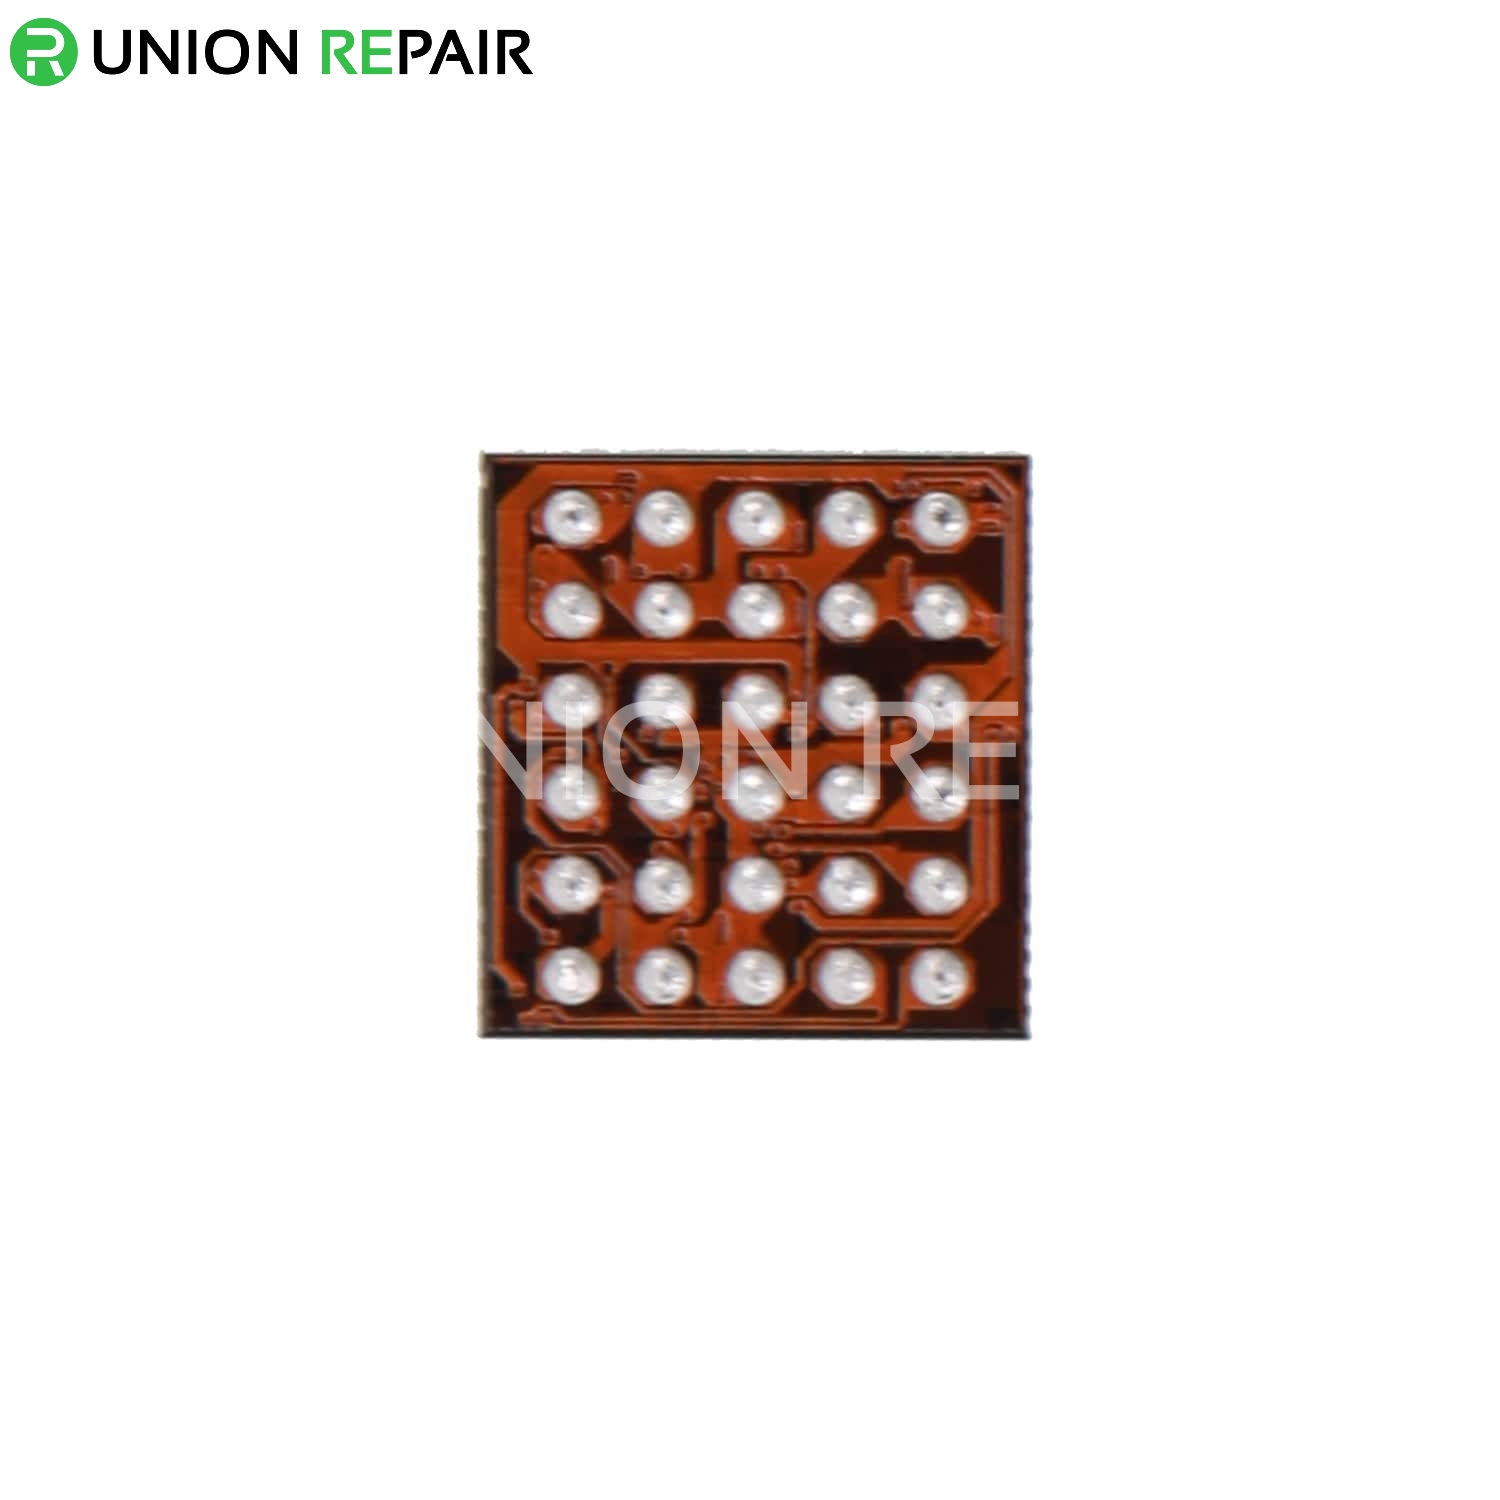 Replacement for iPad Pro 9.7" Audio Manager IC #98721BEWV